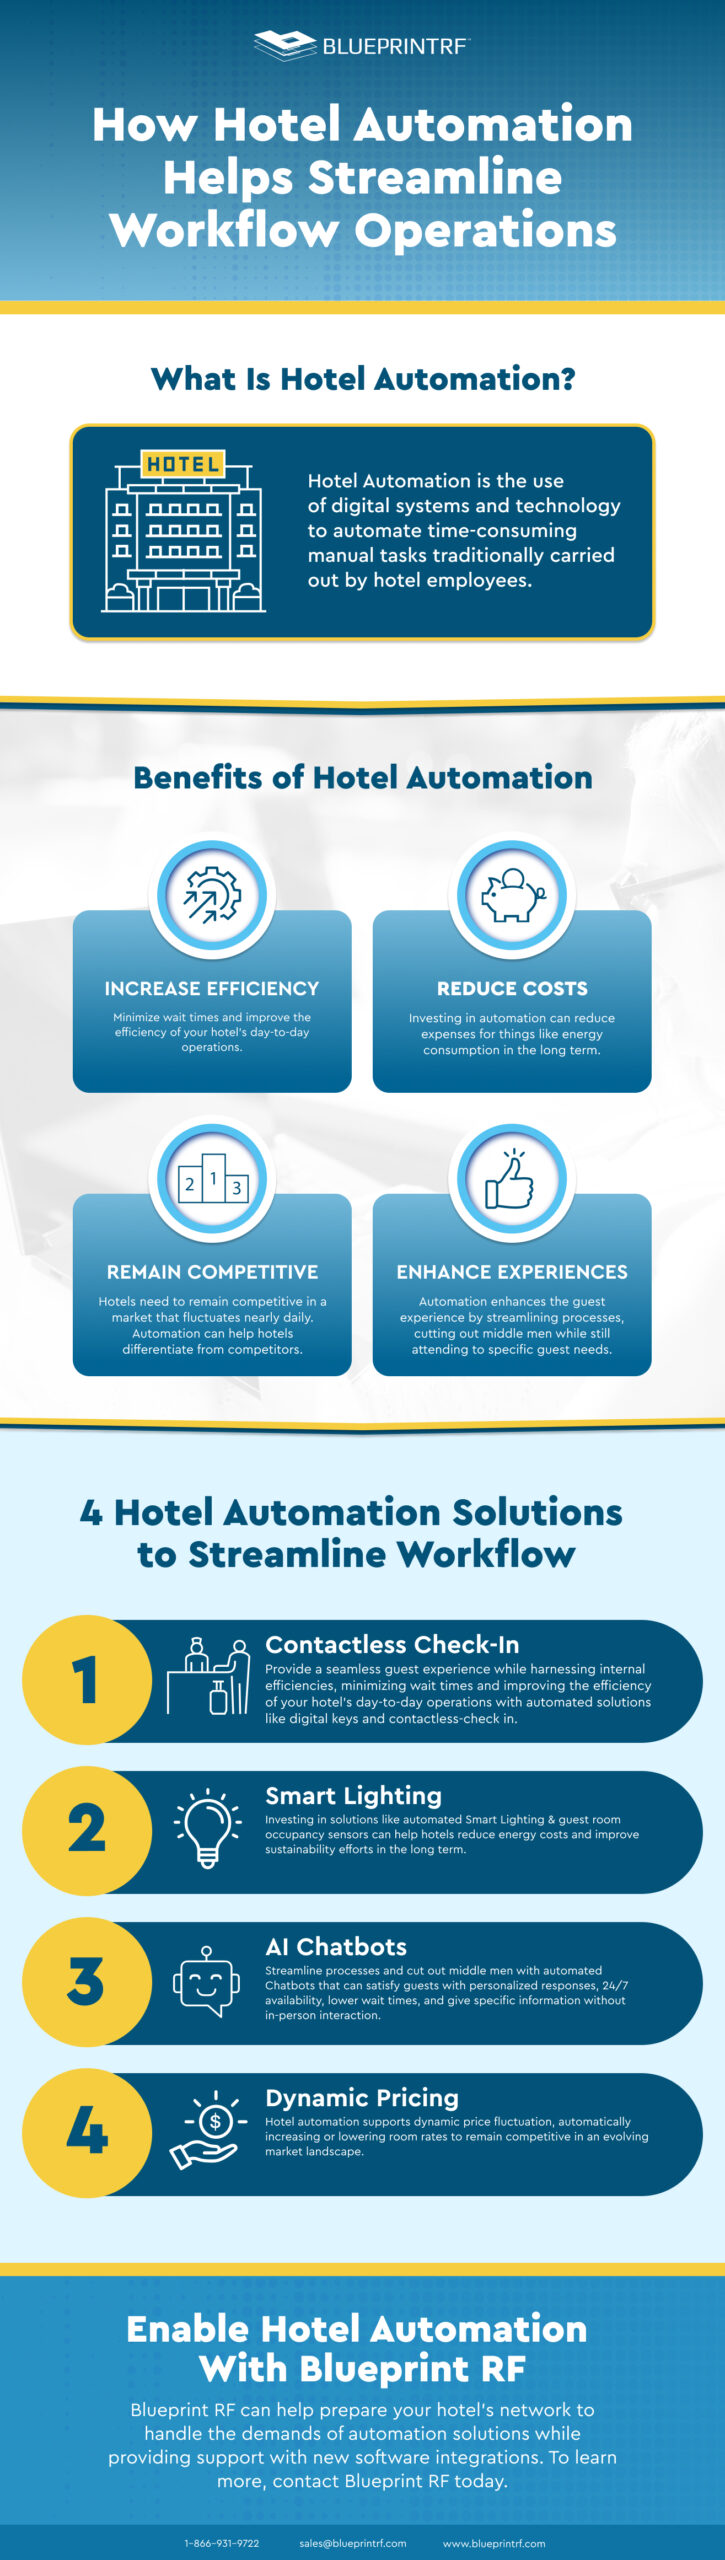 Hotel Automation Workflow Solutions and Examples